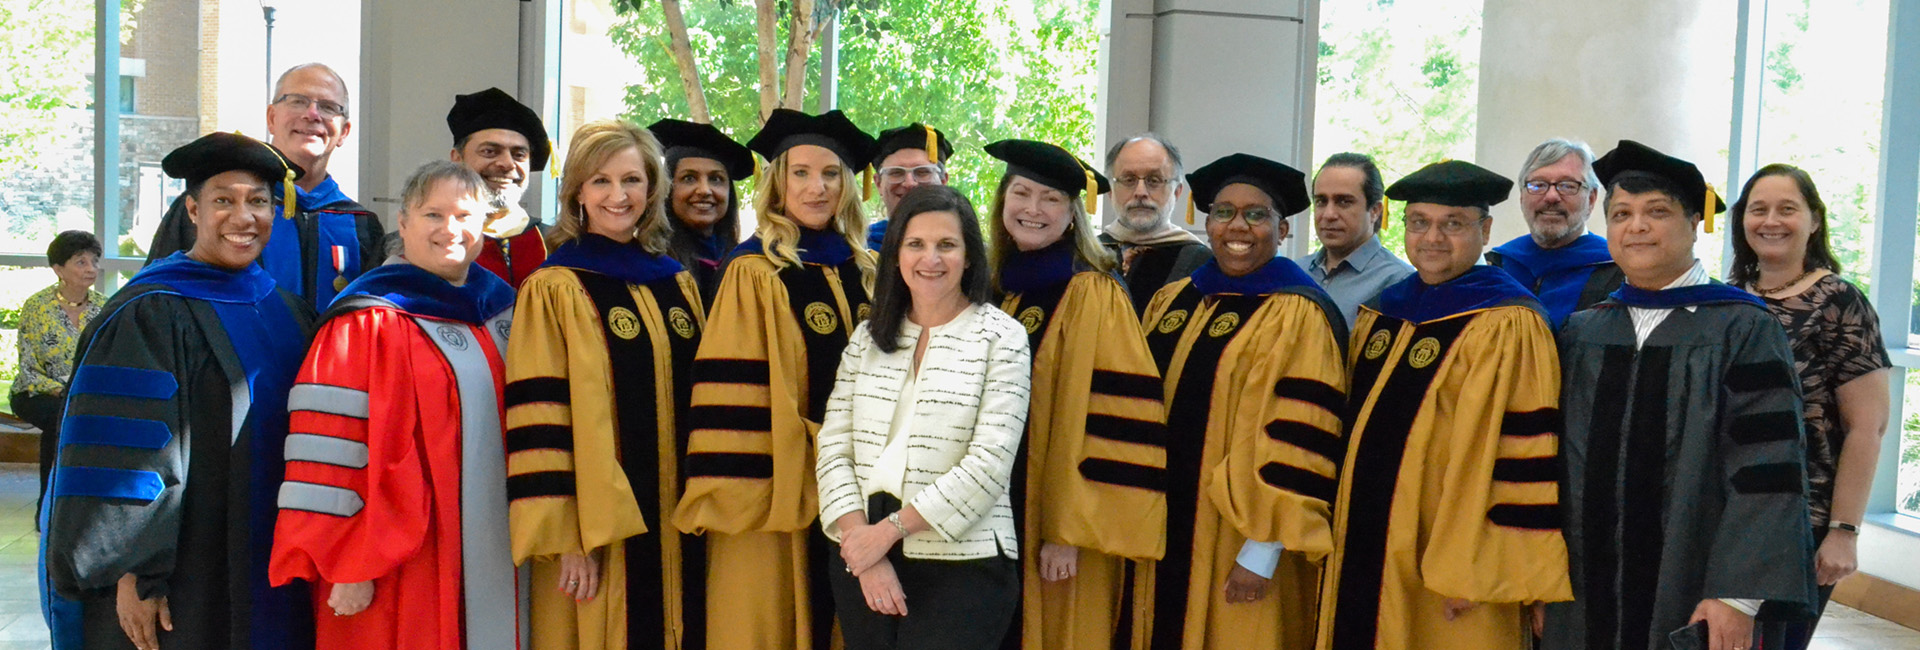 PhD Students at Kennesaw State University